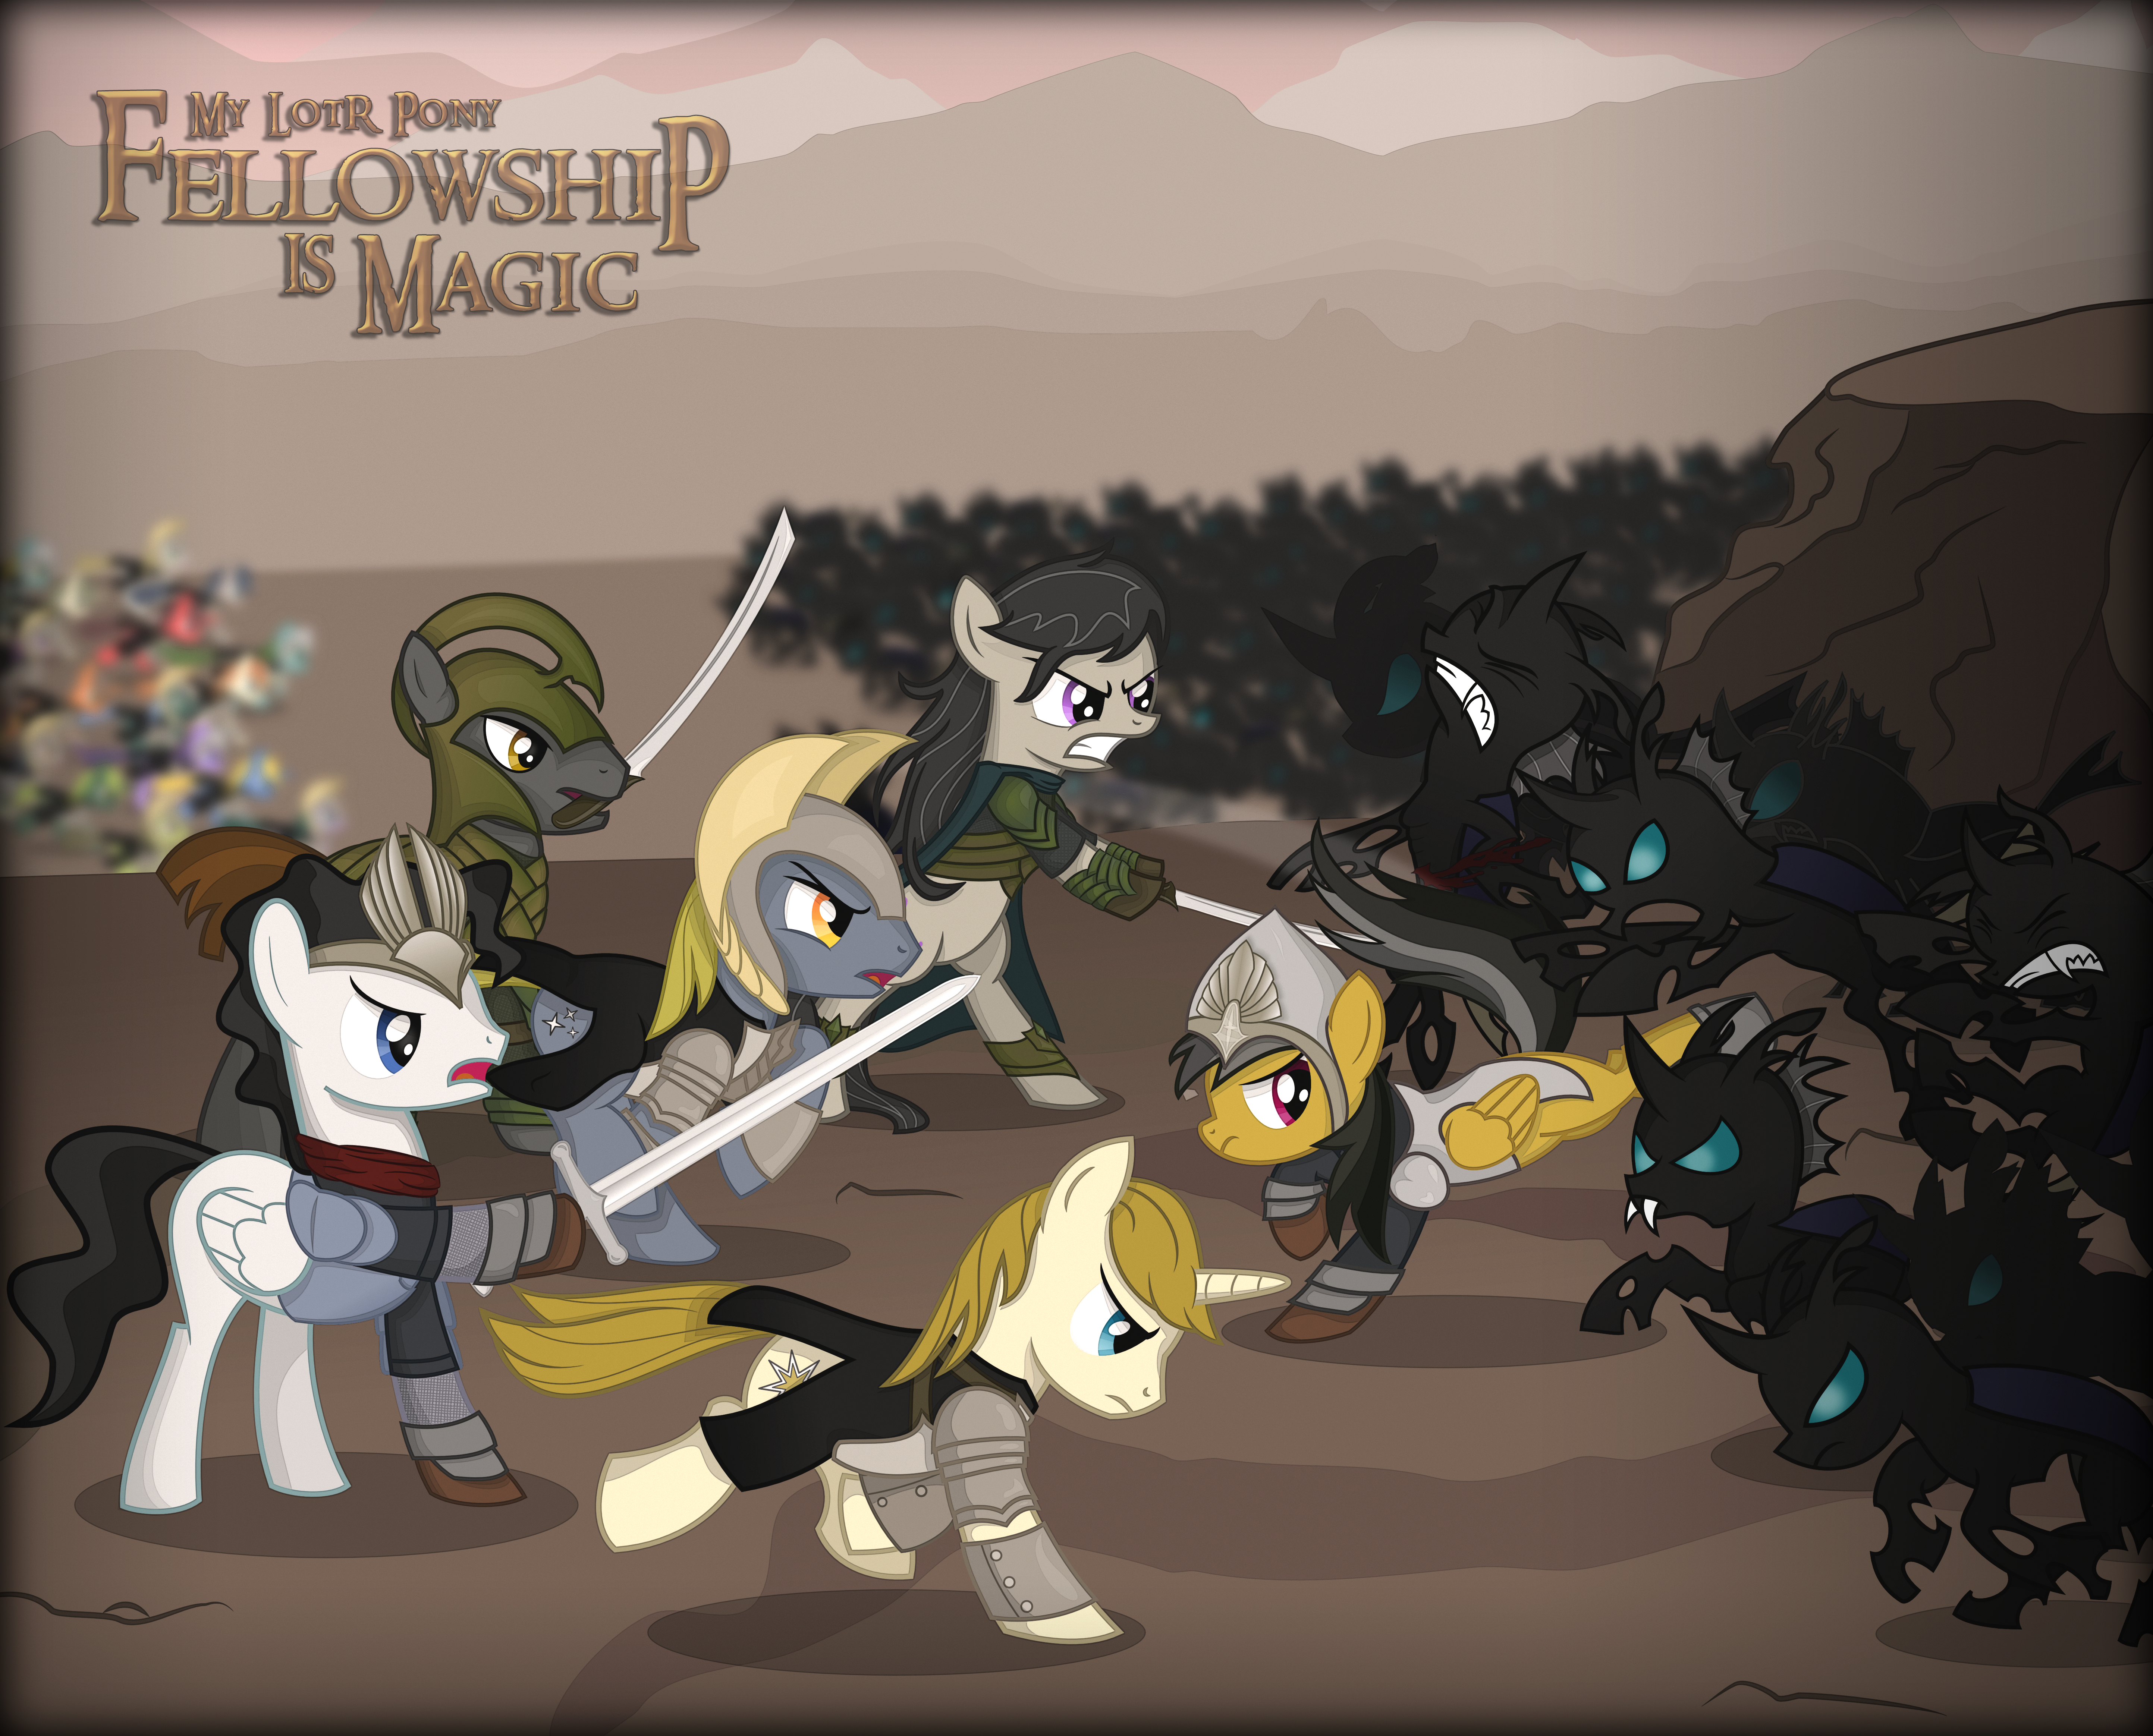 battle_of_dagorlad_by_shadowdark3-d4yjxde.png